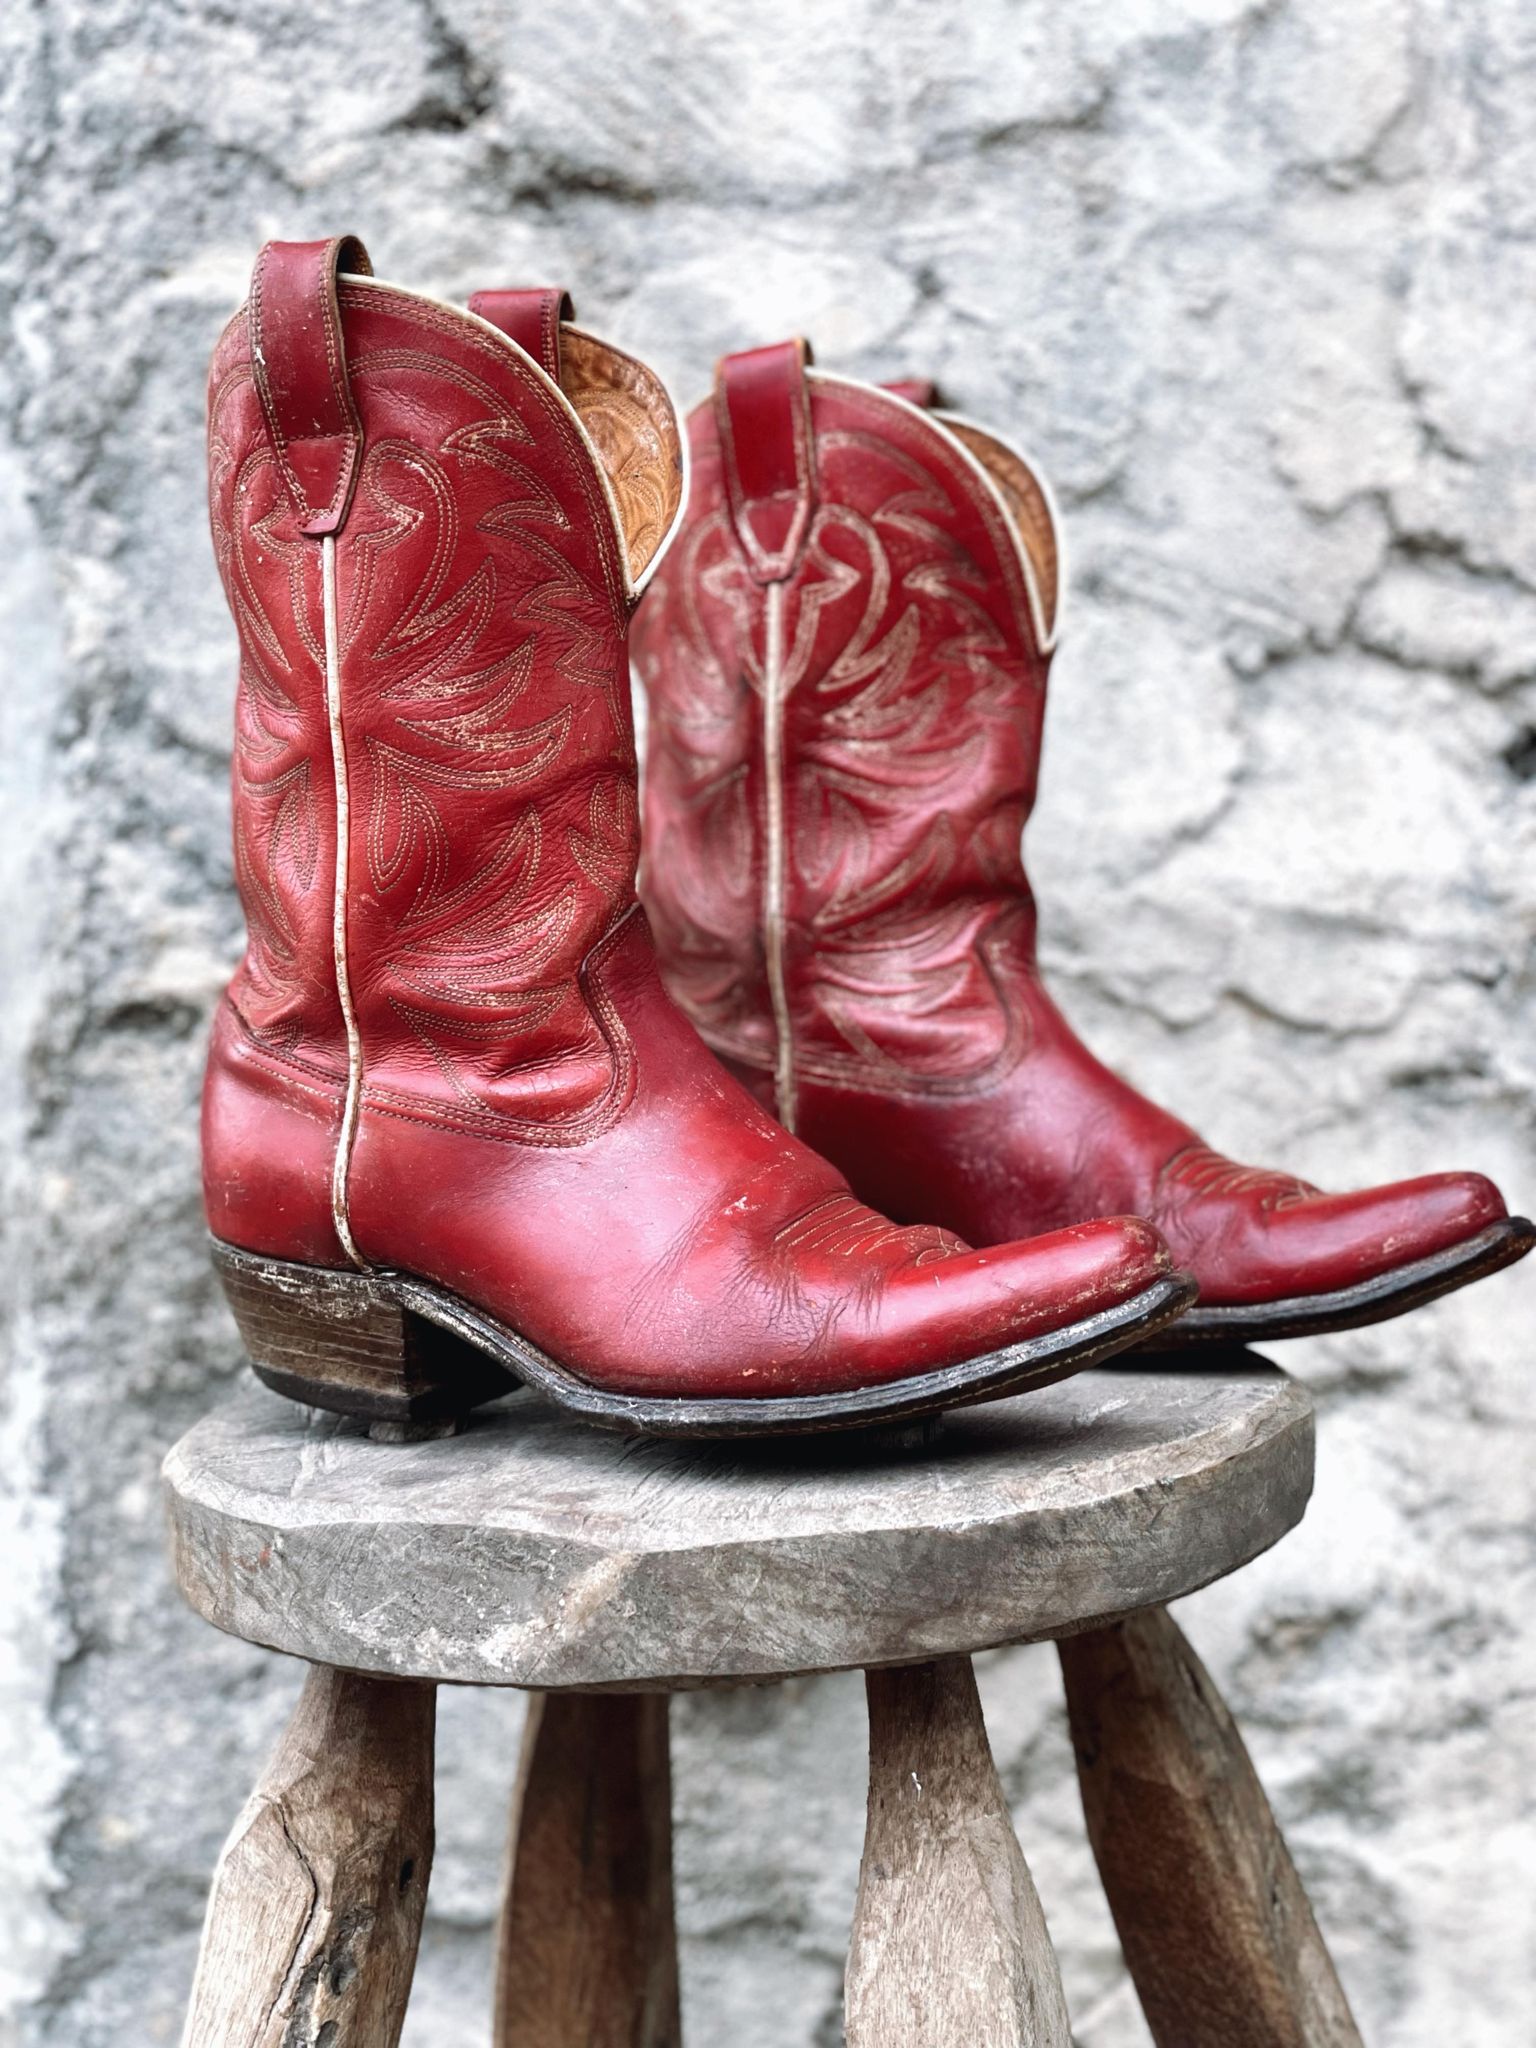 Real Vintage Cowboy Boots, Red Genuine Leather Santiags, Cowgirl Boots,  Vintage 90s Red Cowboy Boots, Western Clothing, Made in Mexico 